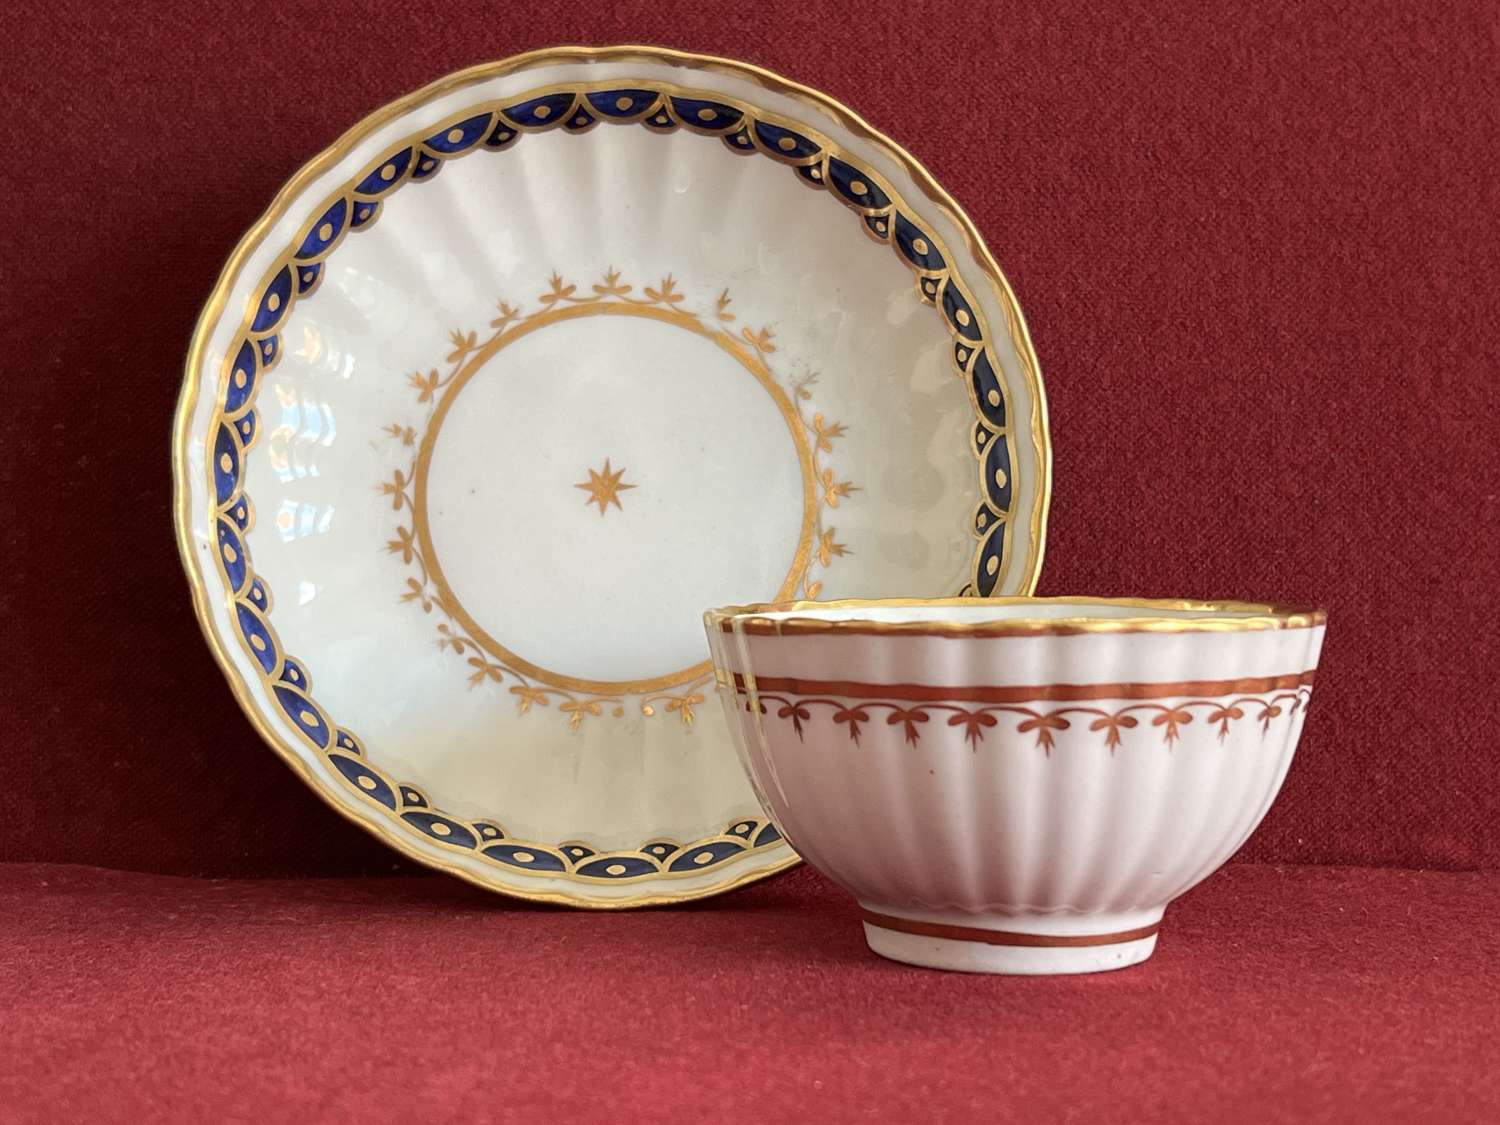 An early New Hall Porcelain Tea Bowl & Saucer in pattern 155 c.1797